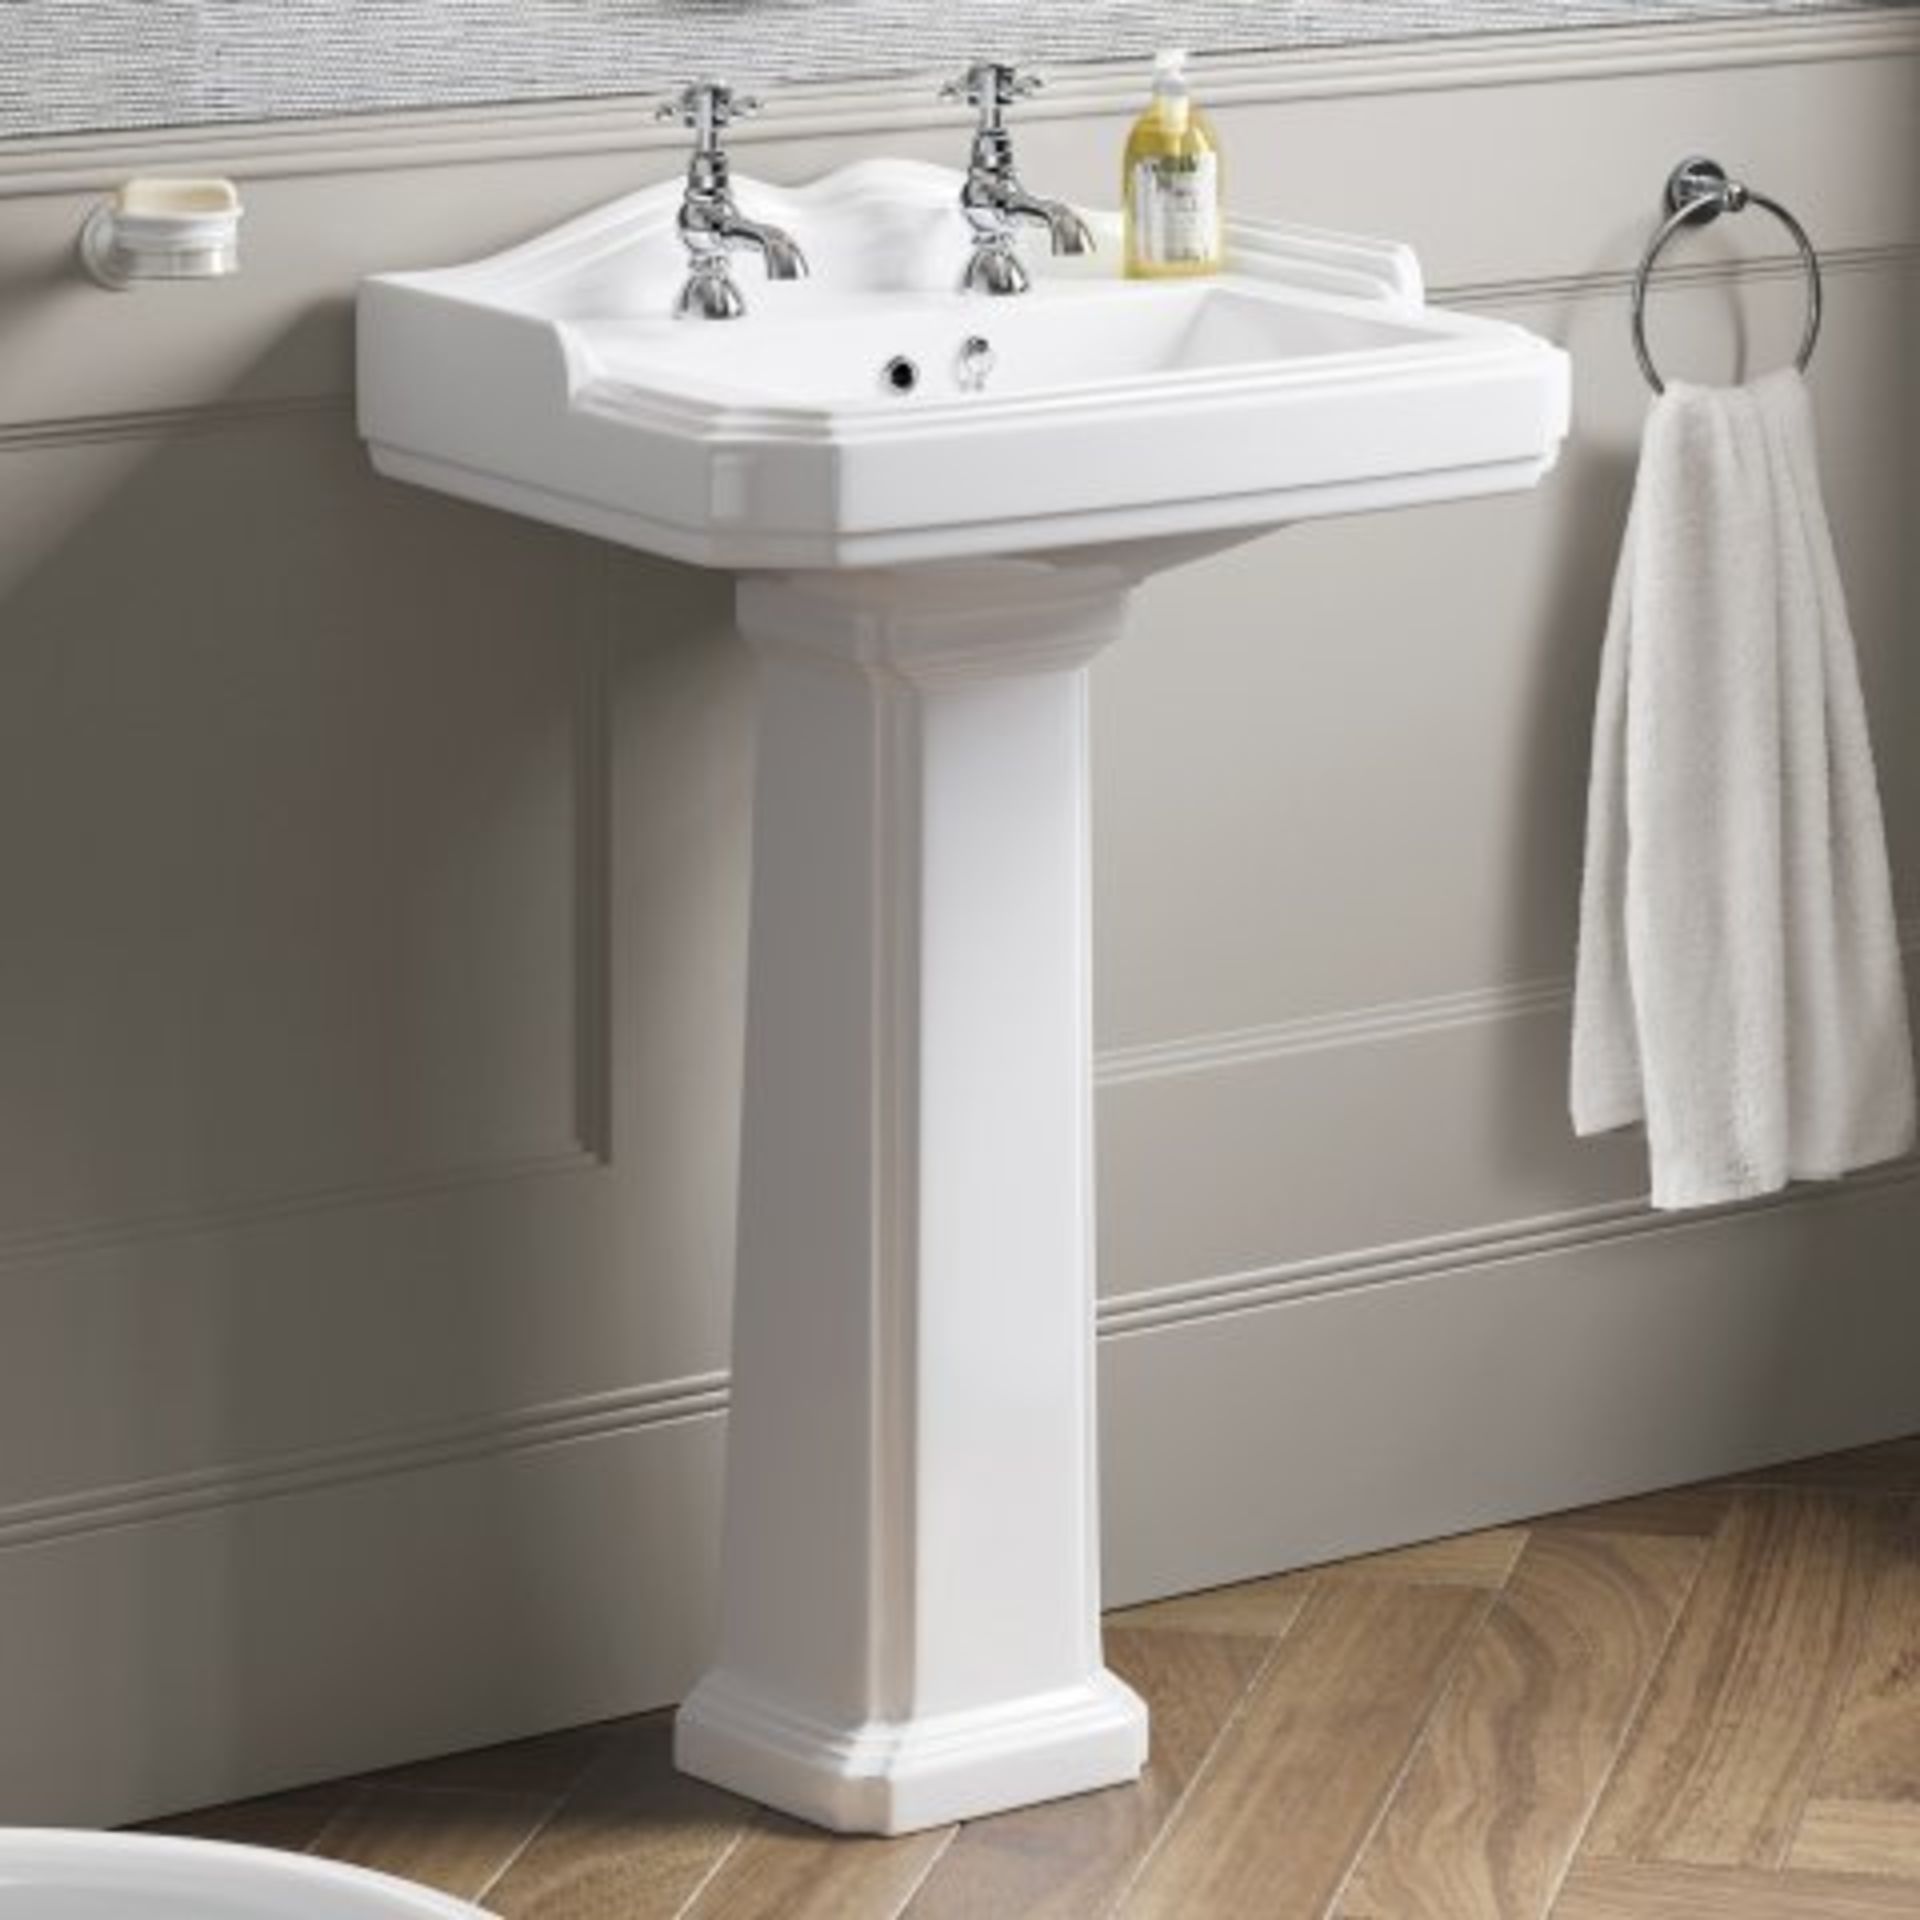 (AA217) Victoria Basin & Pedestal - Double Tap Hole. RRP £175.99. This traditional basin,